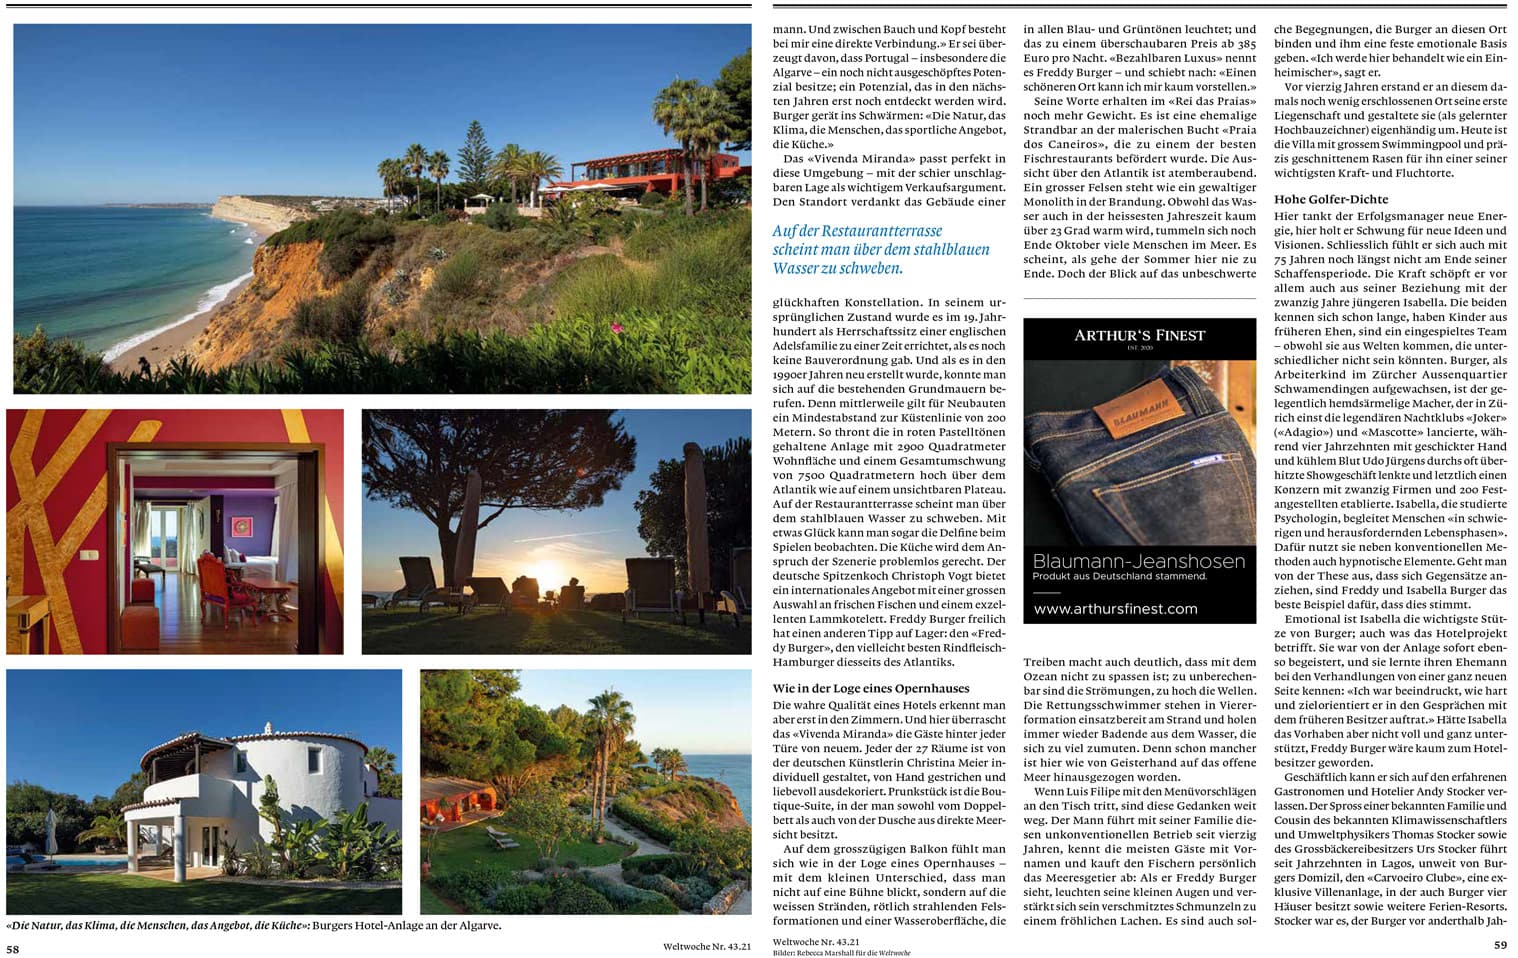 Double page spread from Swiss magazine Die Weltwoche showing a montage of 5 photographs of a hotel and text